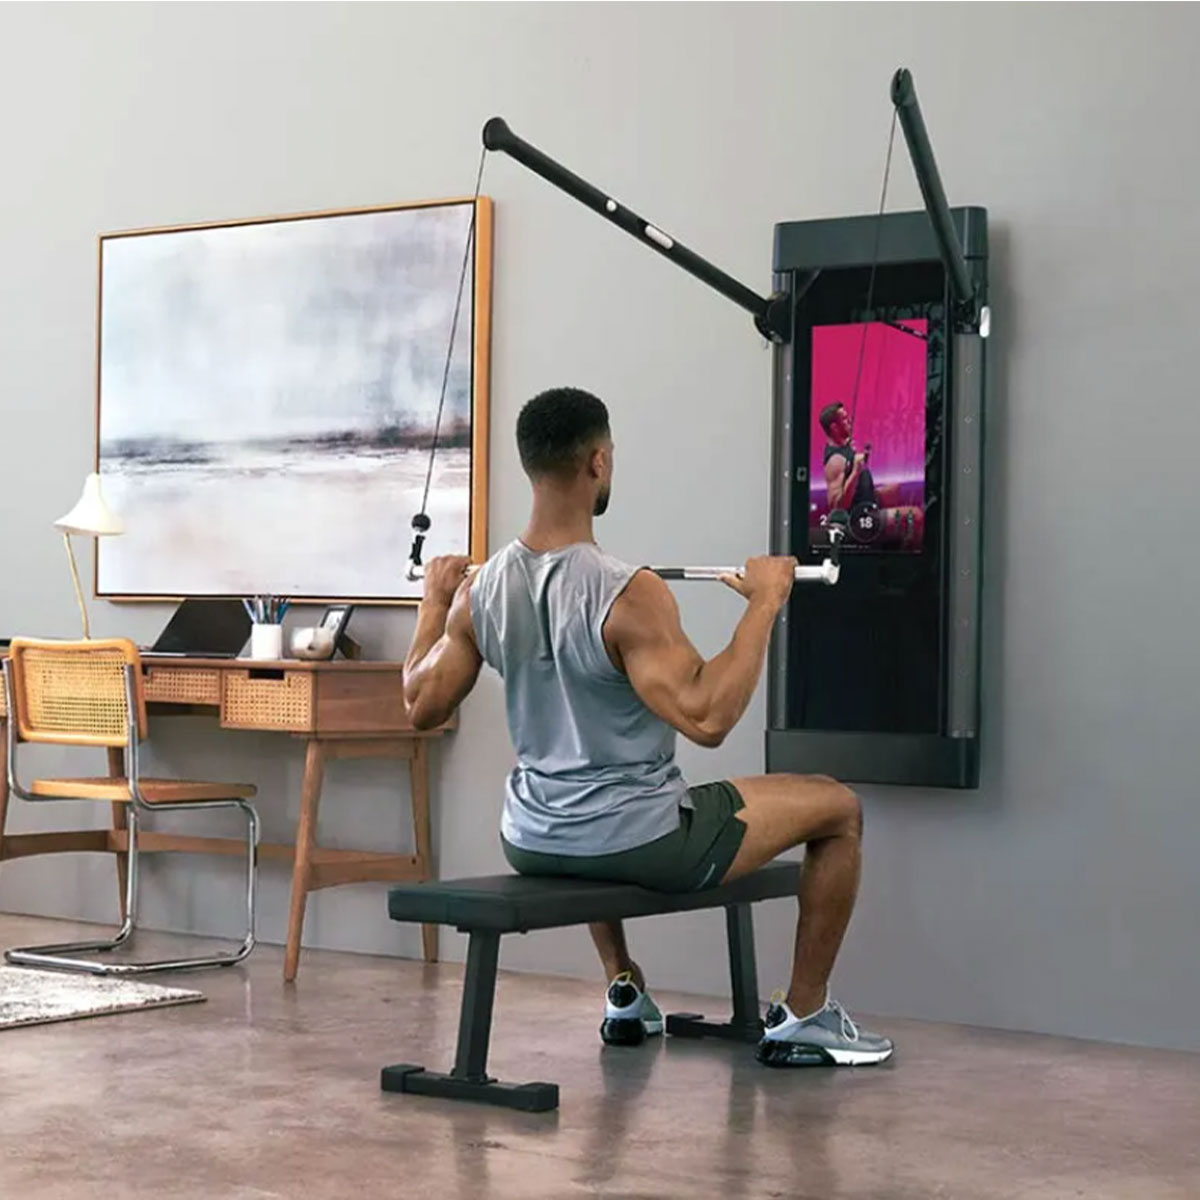 This is the best exercise equipment for small spaces